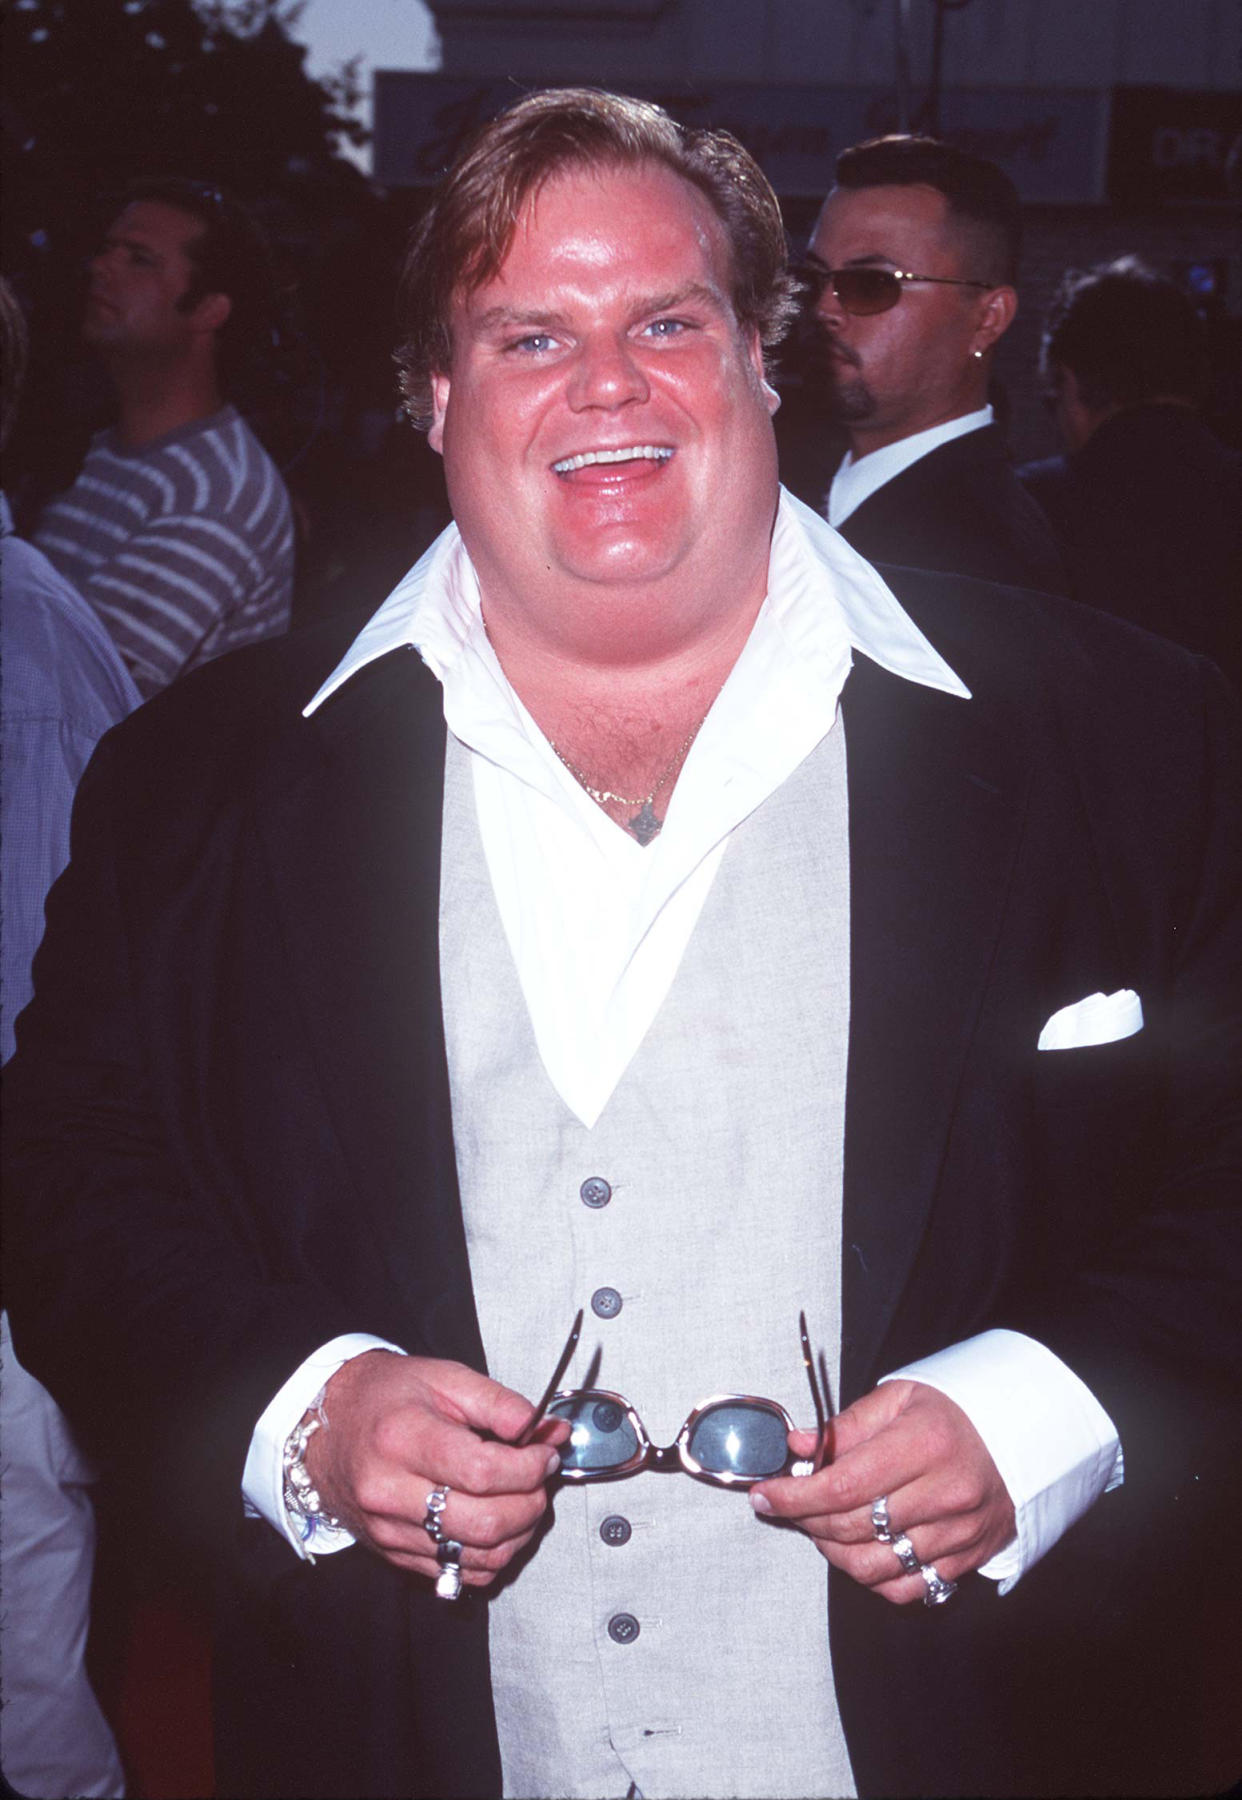 Chris Farley attends a movie premiere on Aug. 25, 1997, in Los Angeles. (Photo: Steve Granitz/WireImage)